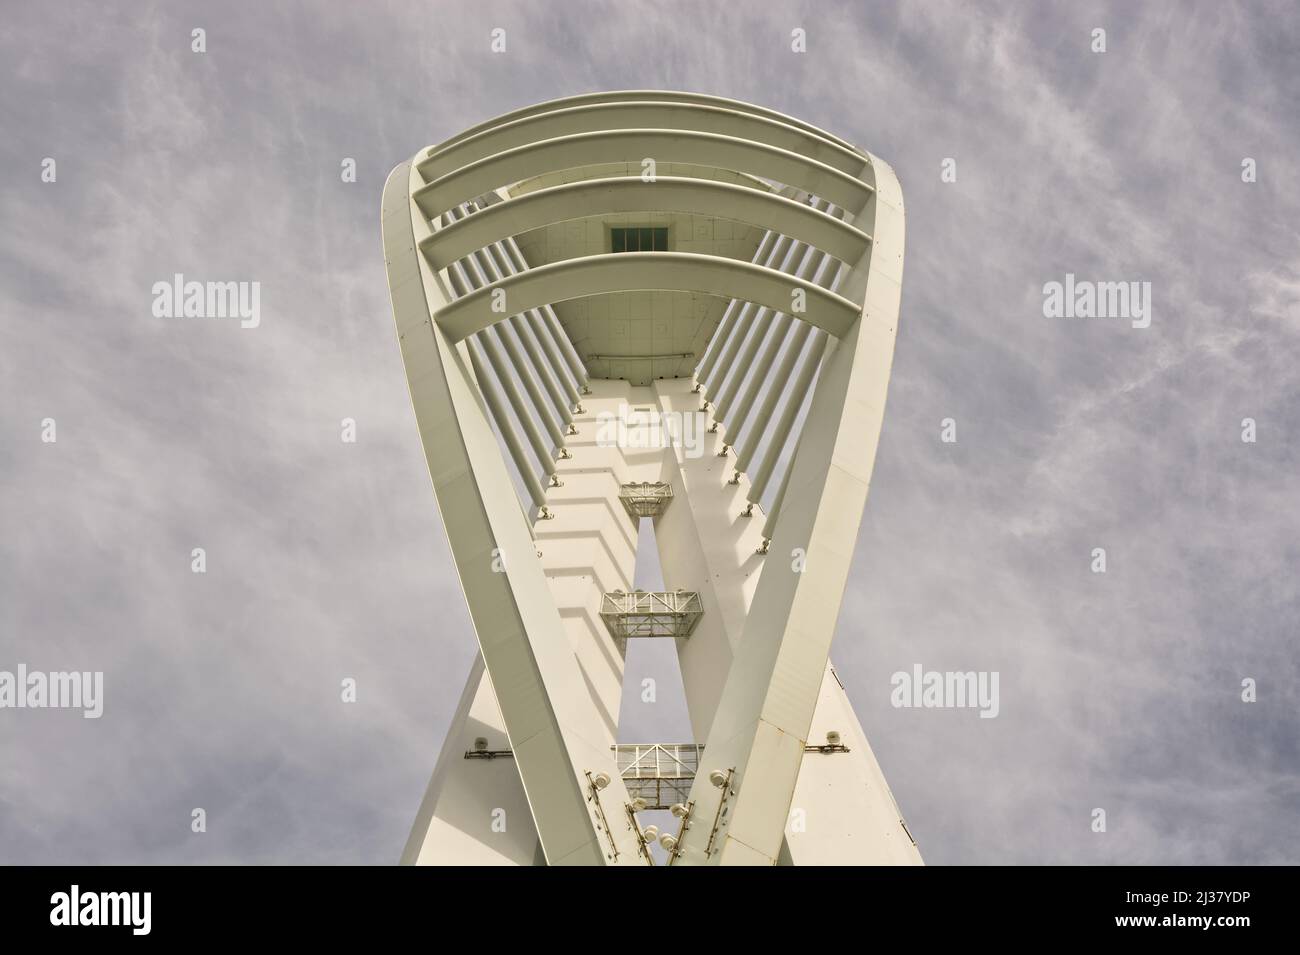 The Spinnaker Tower at Gunwharf Quays in Portsmouth, Hampshire, England. Viewed from base, looking up. Stock Photo